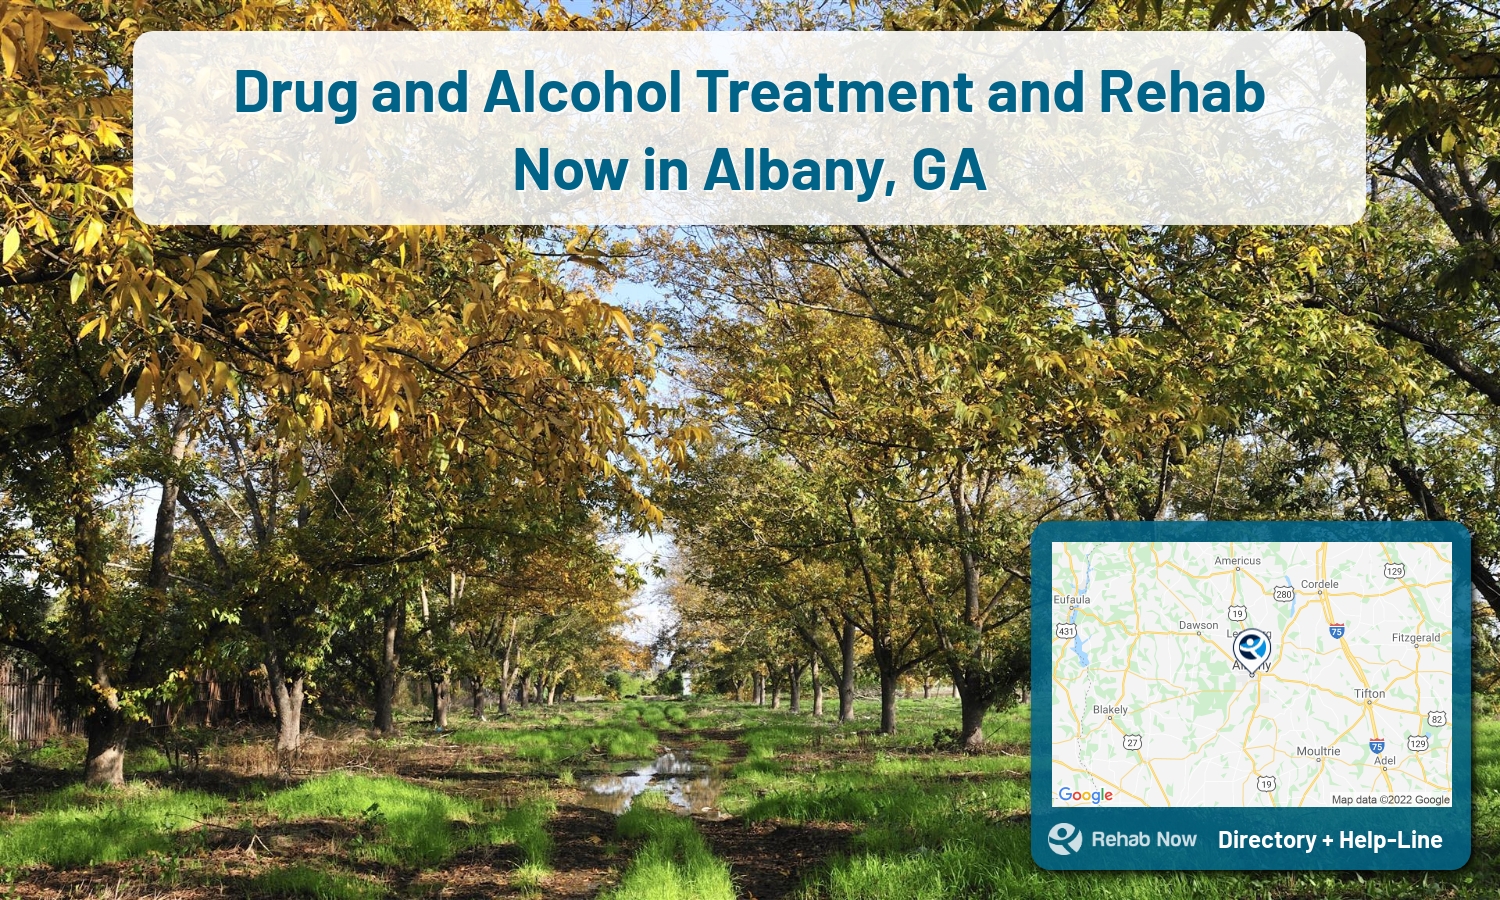 Albany, GA Treatment Centers. Find drug rehab in Albany, Georgia, or detox and treatment programs. Get the right help now!